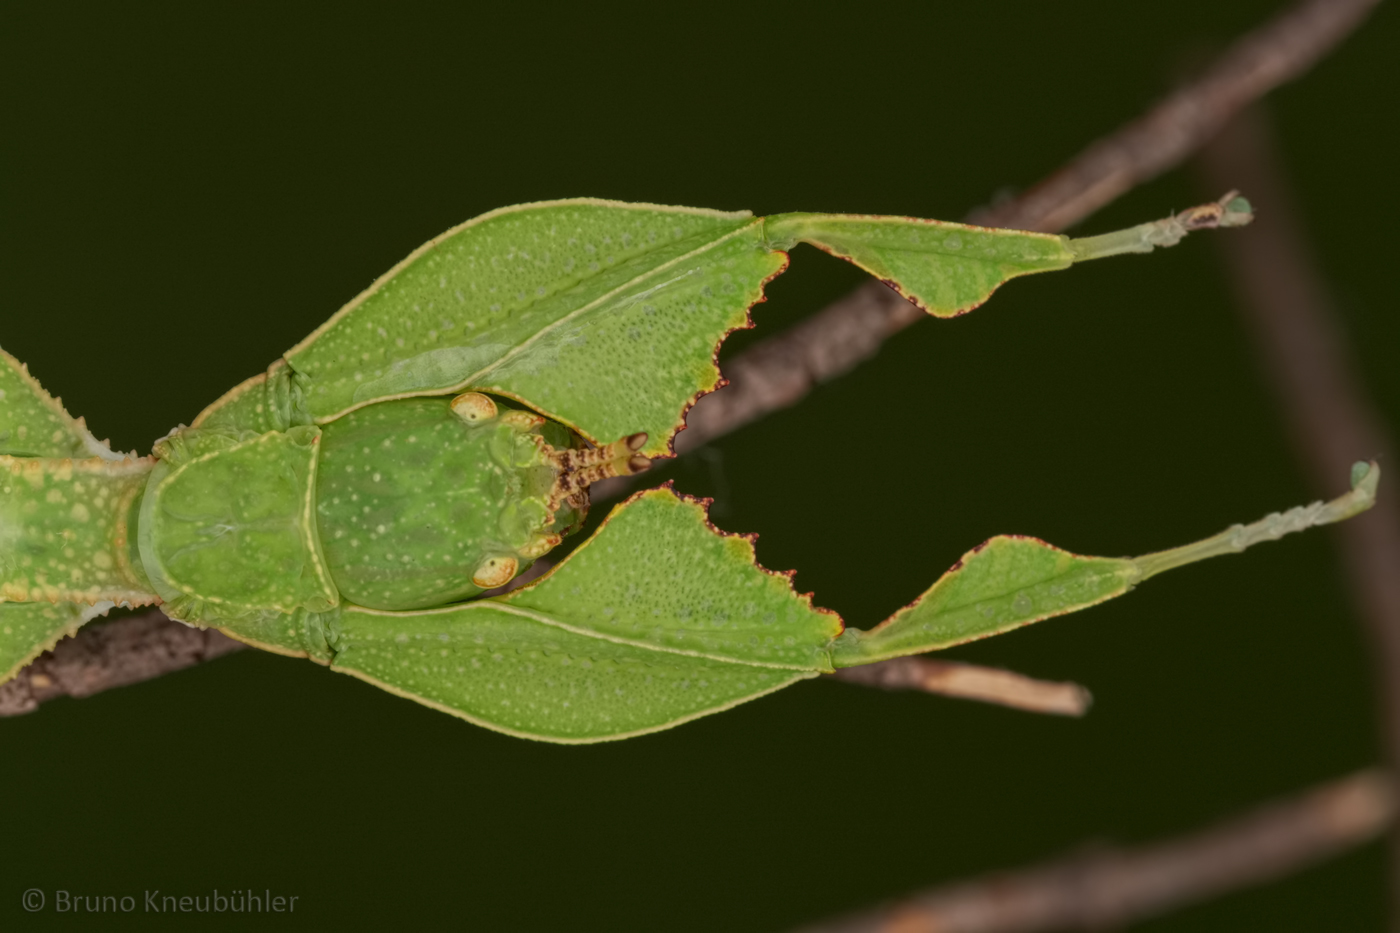 stick insect phasmids Eggs of leaf insect "Phyllium hausleithneri" x30 